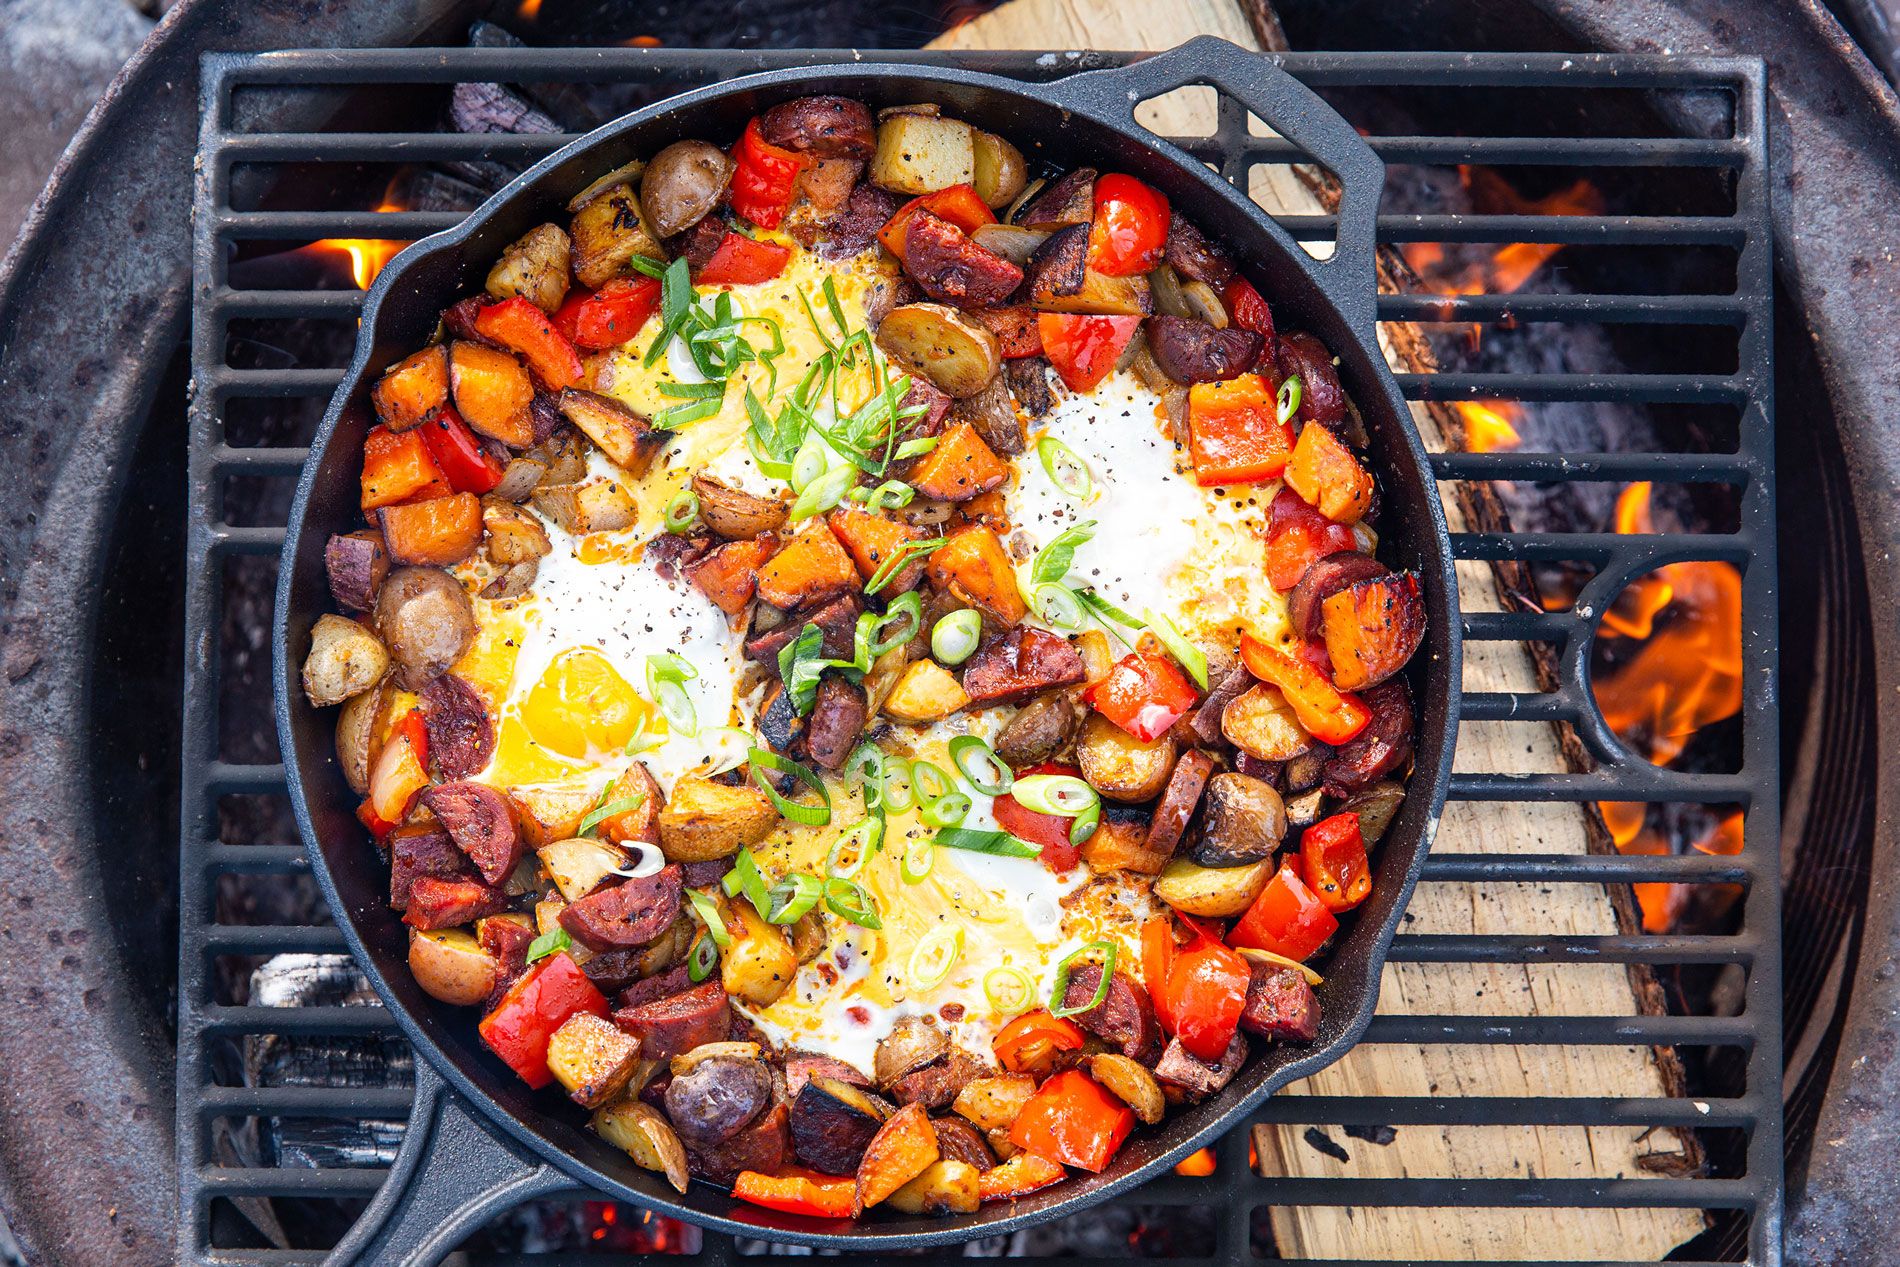 Cast Iron Recipes - Over The Fire Cooking